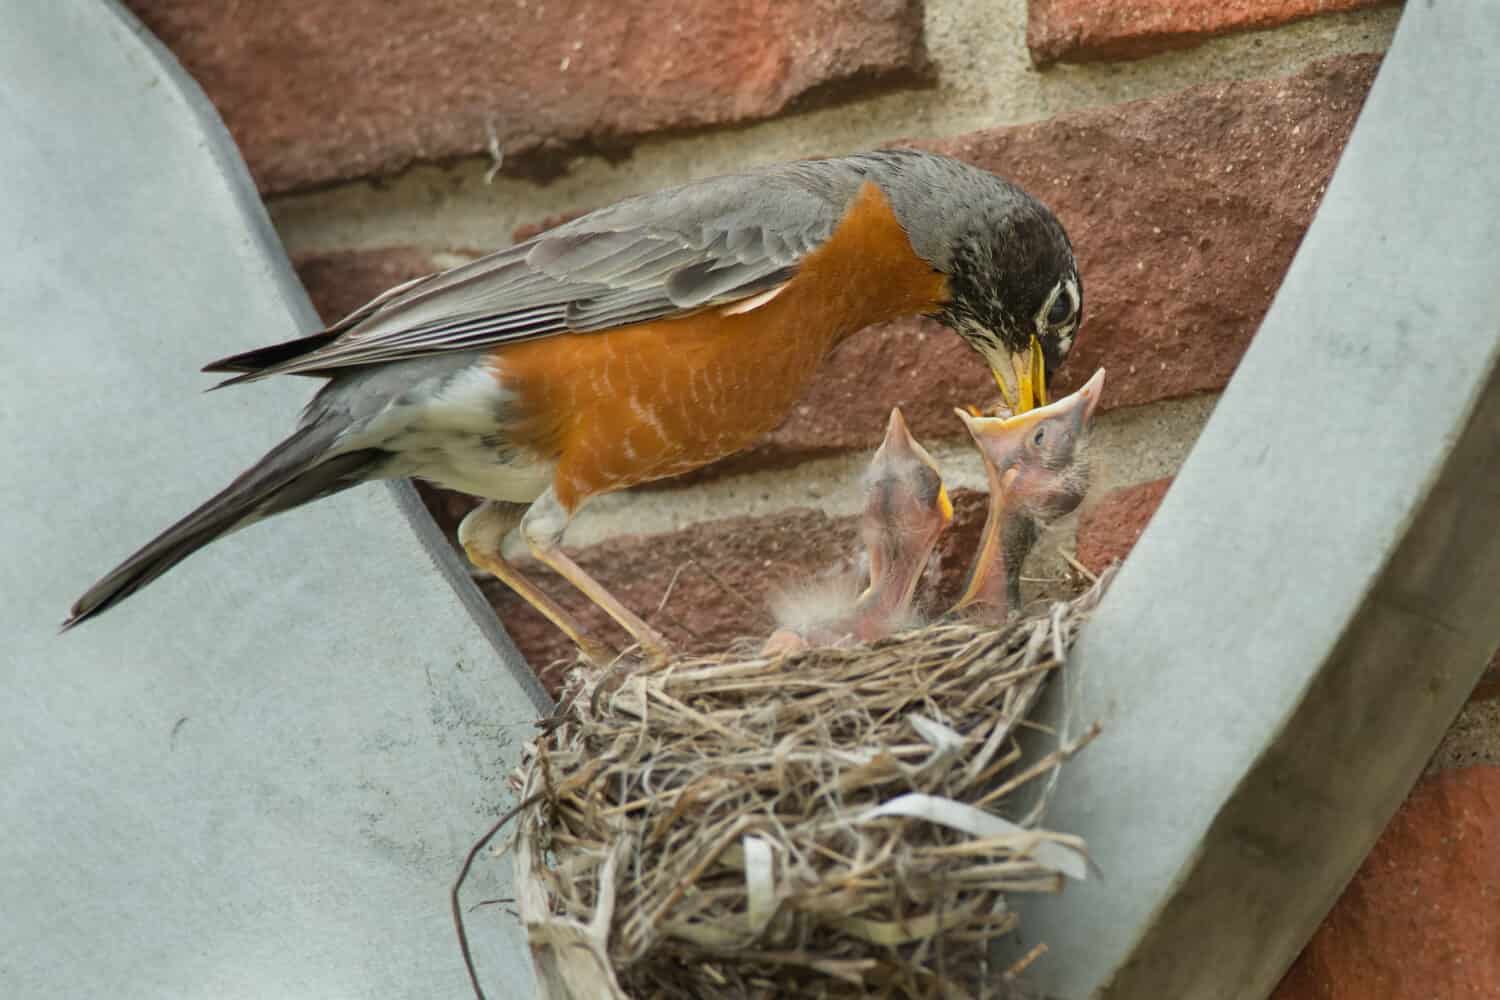 An American Robin is feeding one of its chicks in the nest on the side of a building